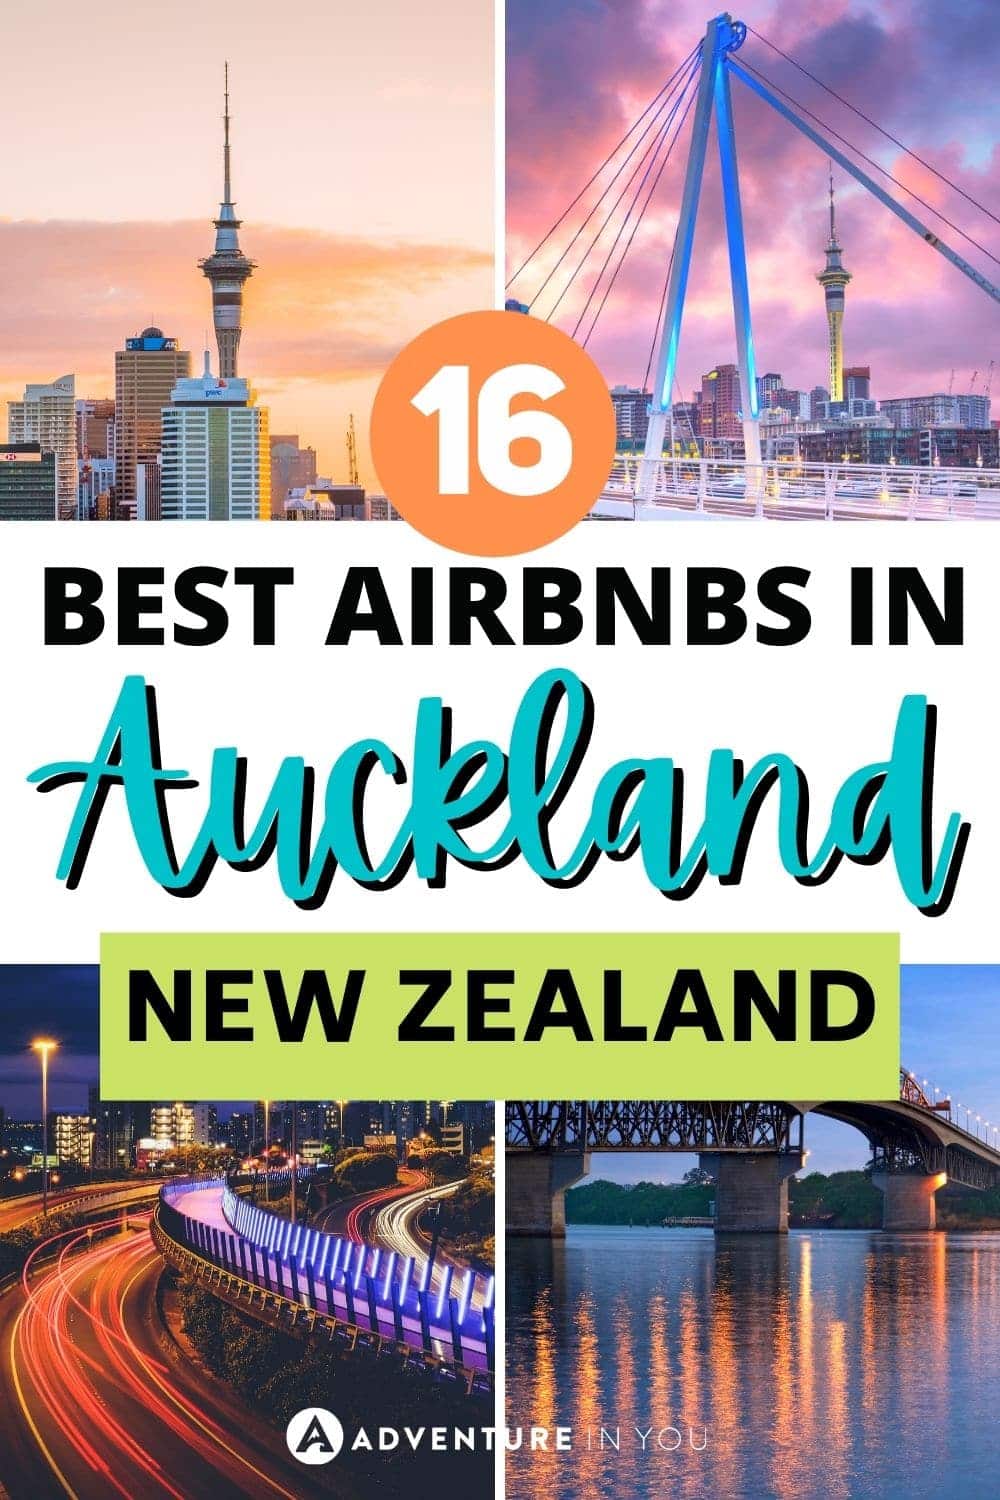 Airbnbs in Auckland | Looking for the best Airbnbs in Auckland Click here to see our top picks. #newzealand #auckland #wheretostayinauckland